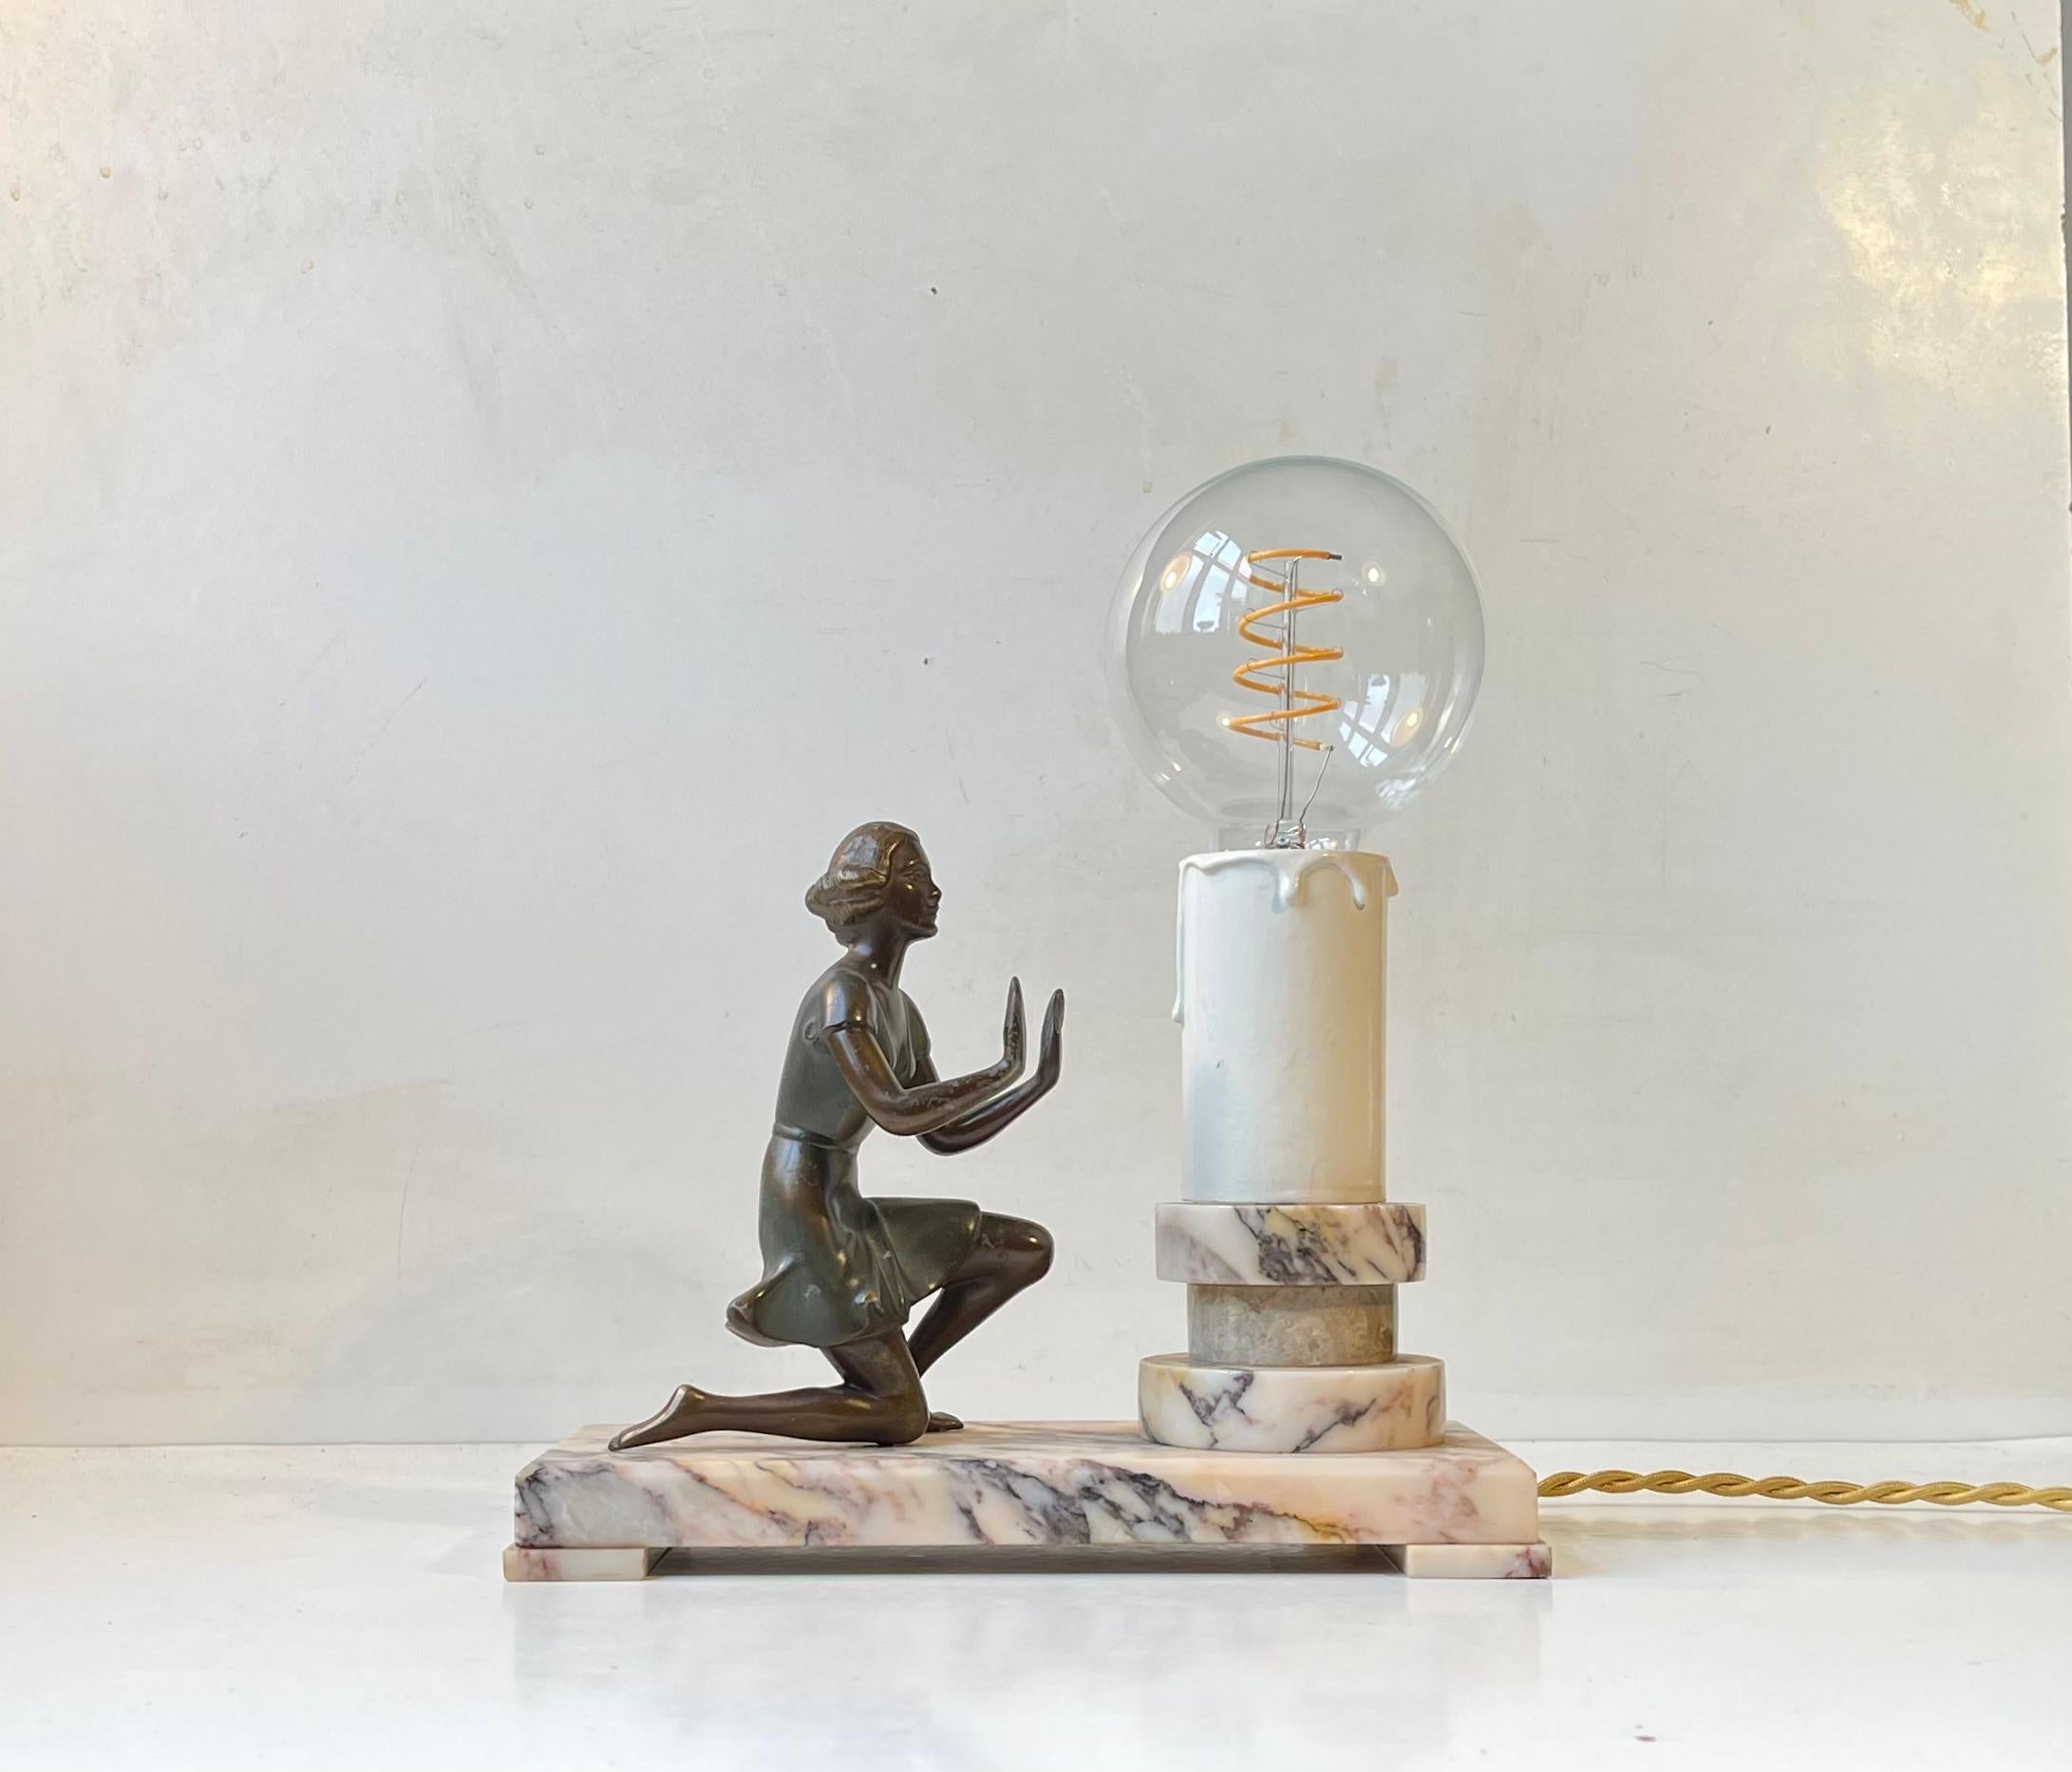 Ornate figural table light featuring architecturally set onyx marble base, stylized faux candle and a bronze sculpture/figurine warming her hands at the burning 'light'. It was made in France during the 1930s. Measurements: H: 27 cm, W: 24 cm, Dept: